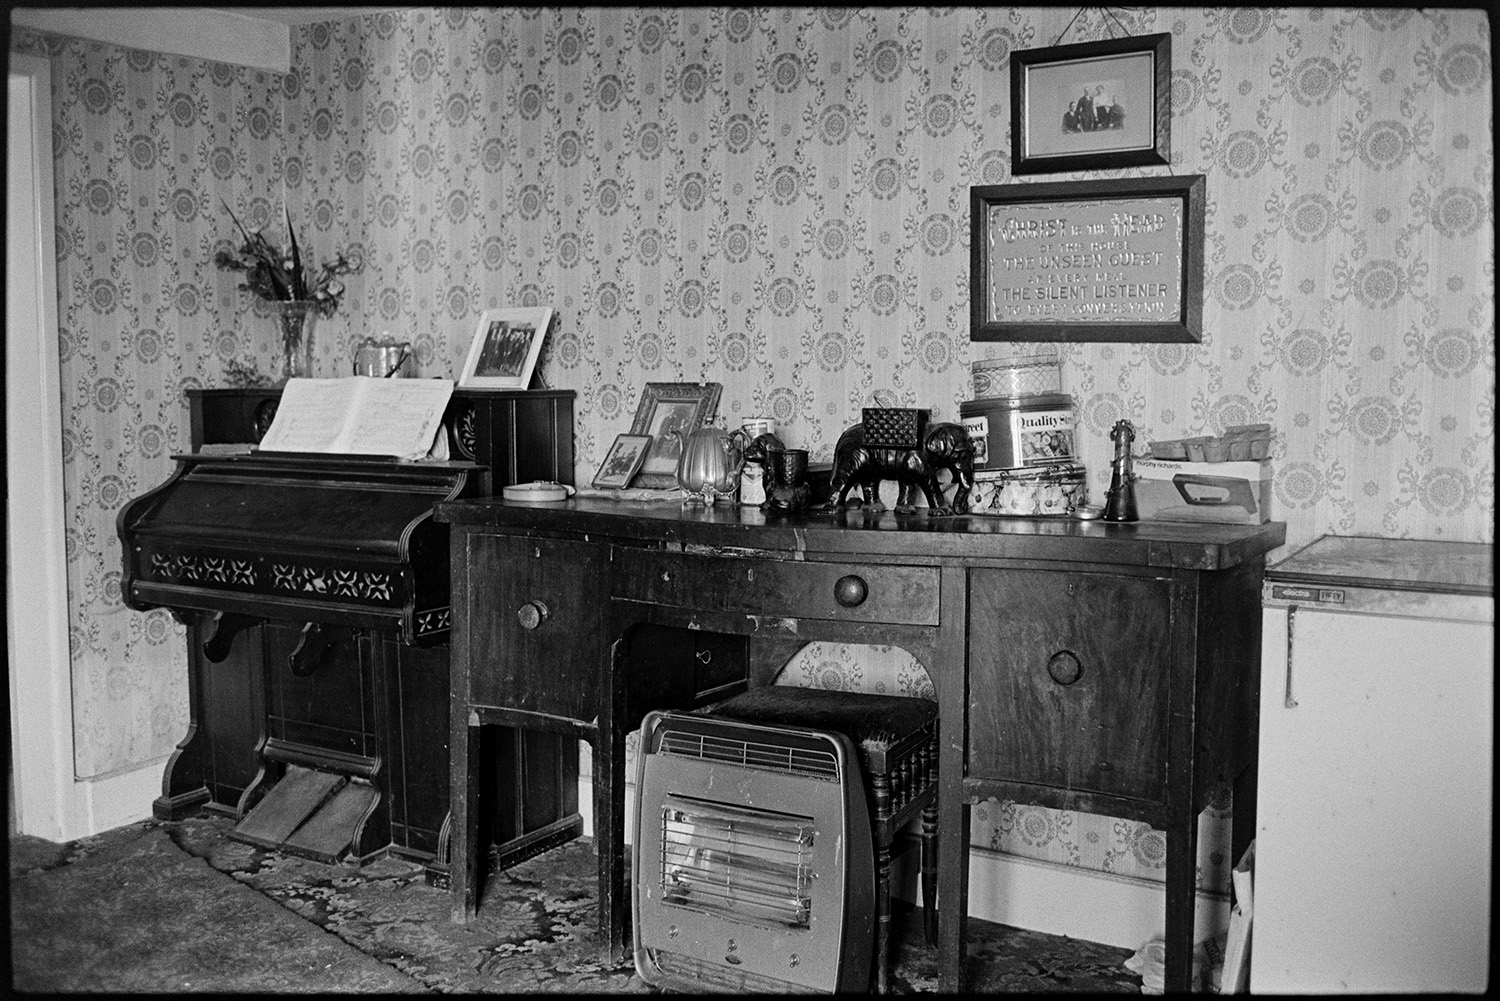 Farmhouse interior, side table, harmonium, electric fire.
[Ornaments, tins and framed photographs on a side table next to a Harmonium, a freezer and an electric fire in the Ford family house at Venton, near Dolton. A religious framed motto and family picture are hung on the wall in the background. The wall is covered with patterned wallpaper.]